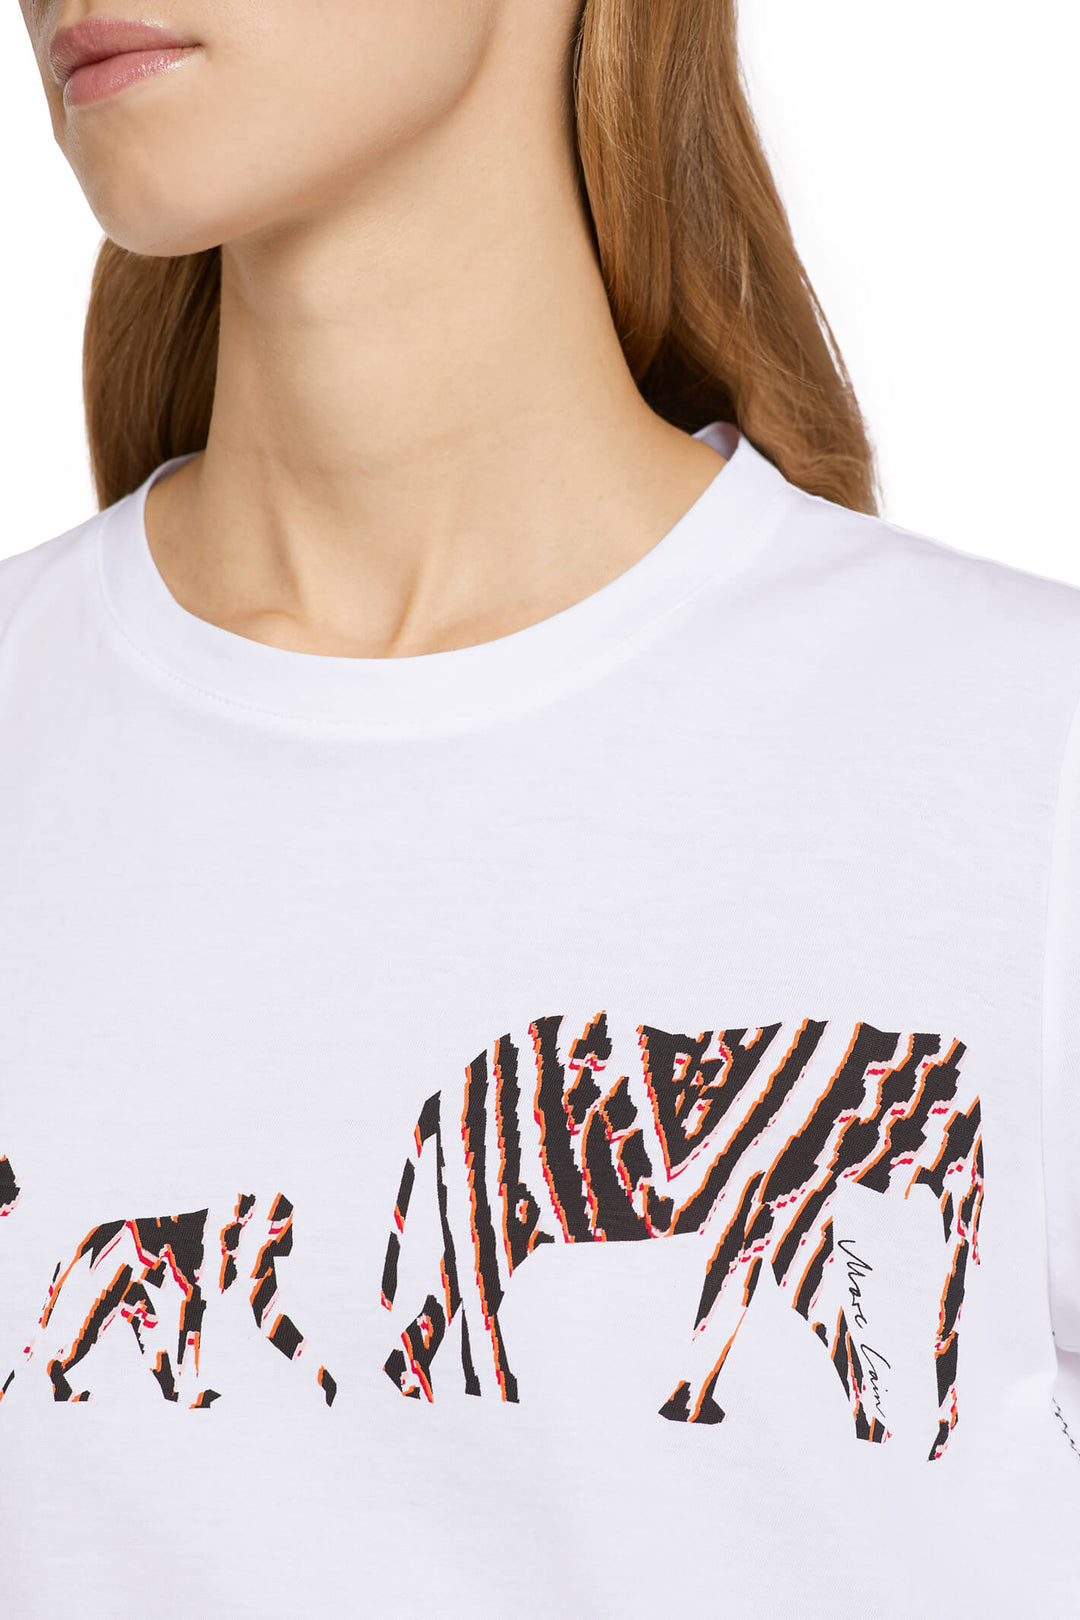 Marc Cain Collection UC 48.10 J81 White African Fairy Tale Motif T-Shirt - Olivia Grace Fashion